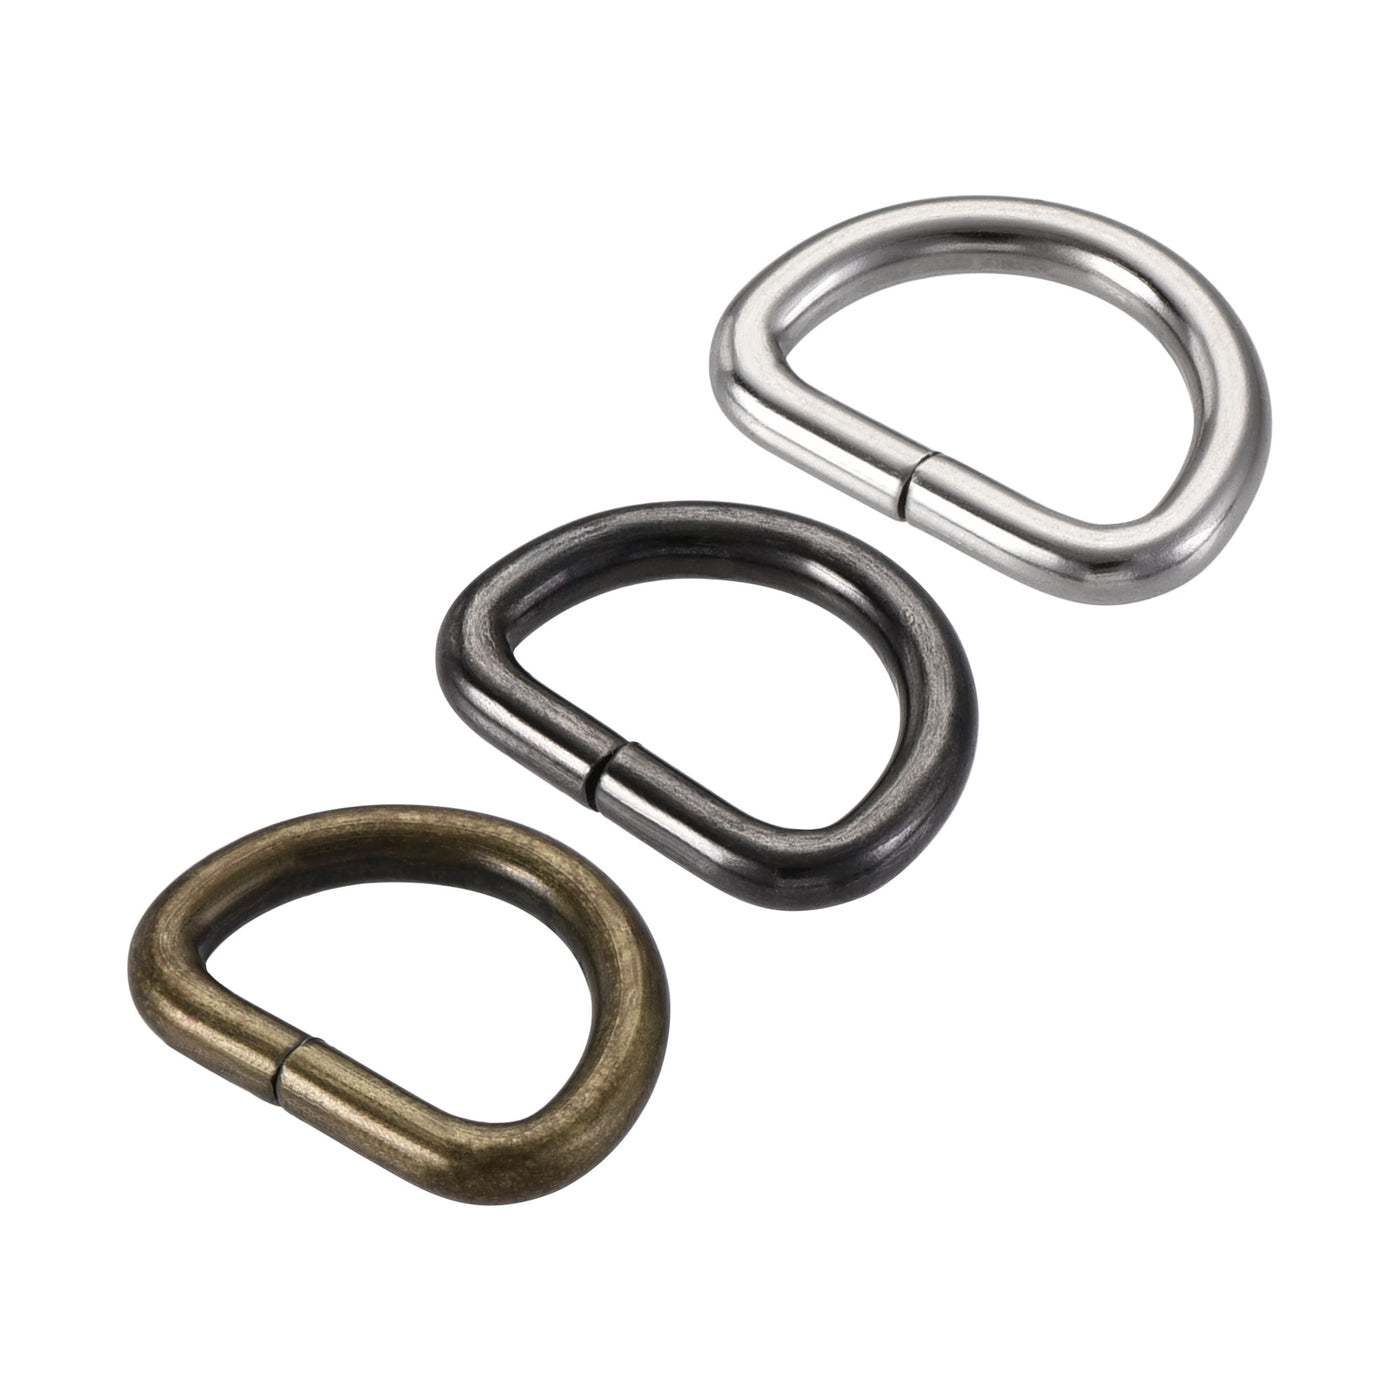 uxcell Uxcell Metal D Ring 0.79"(20mm) D-Rings Buckle Silver Tone, Bronze Tone, Black(Total 15pcs)